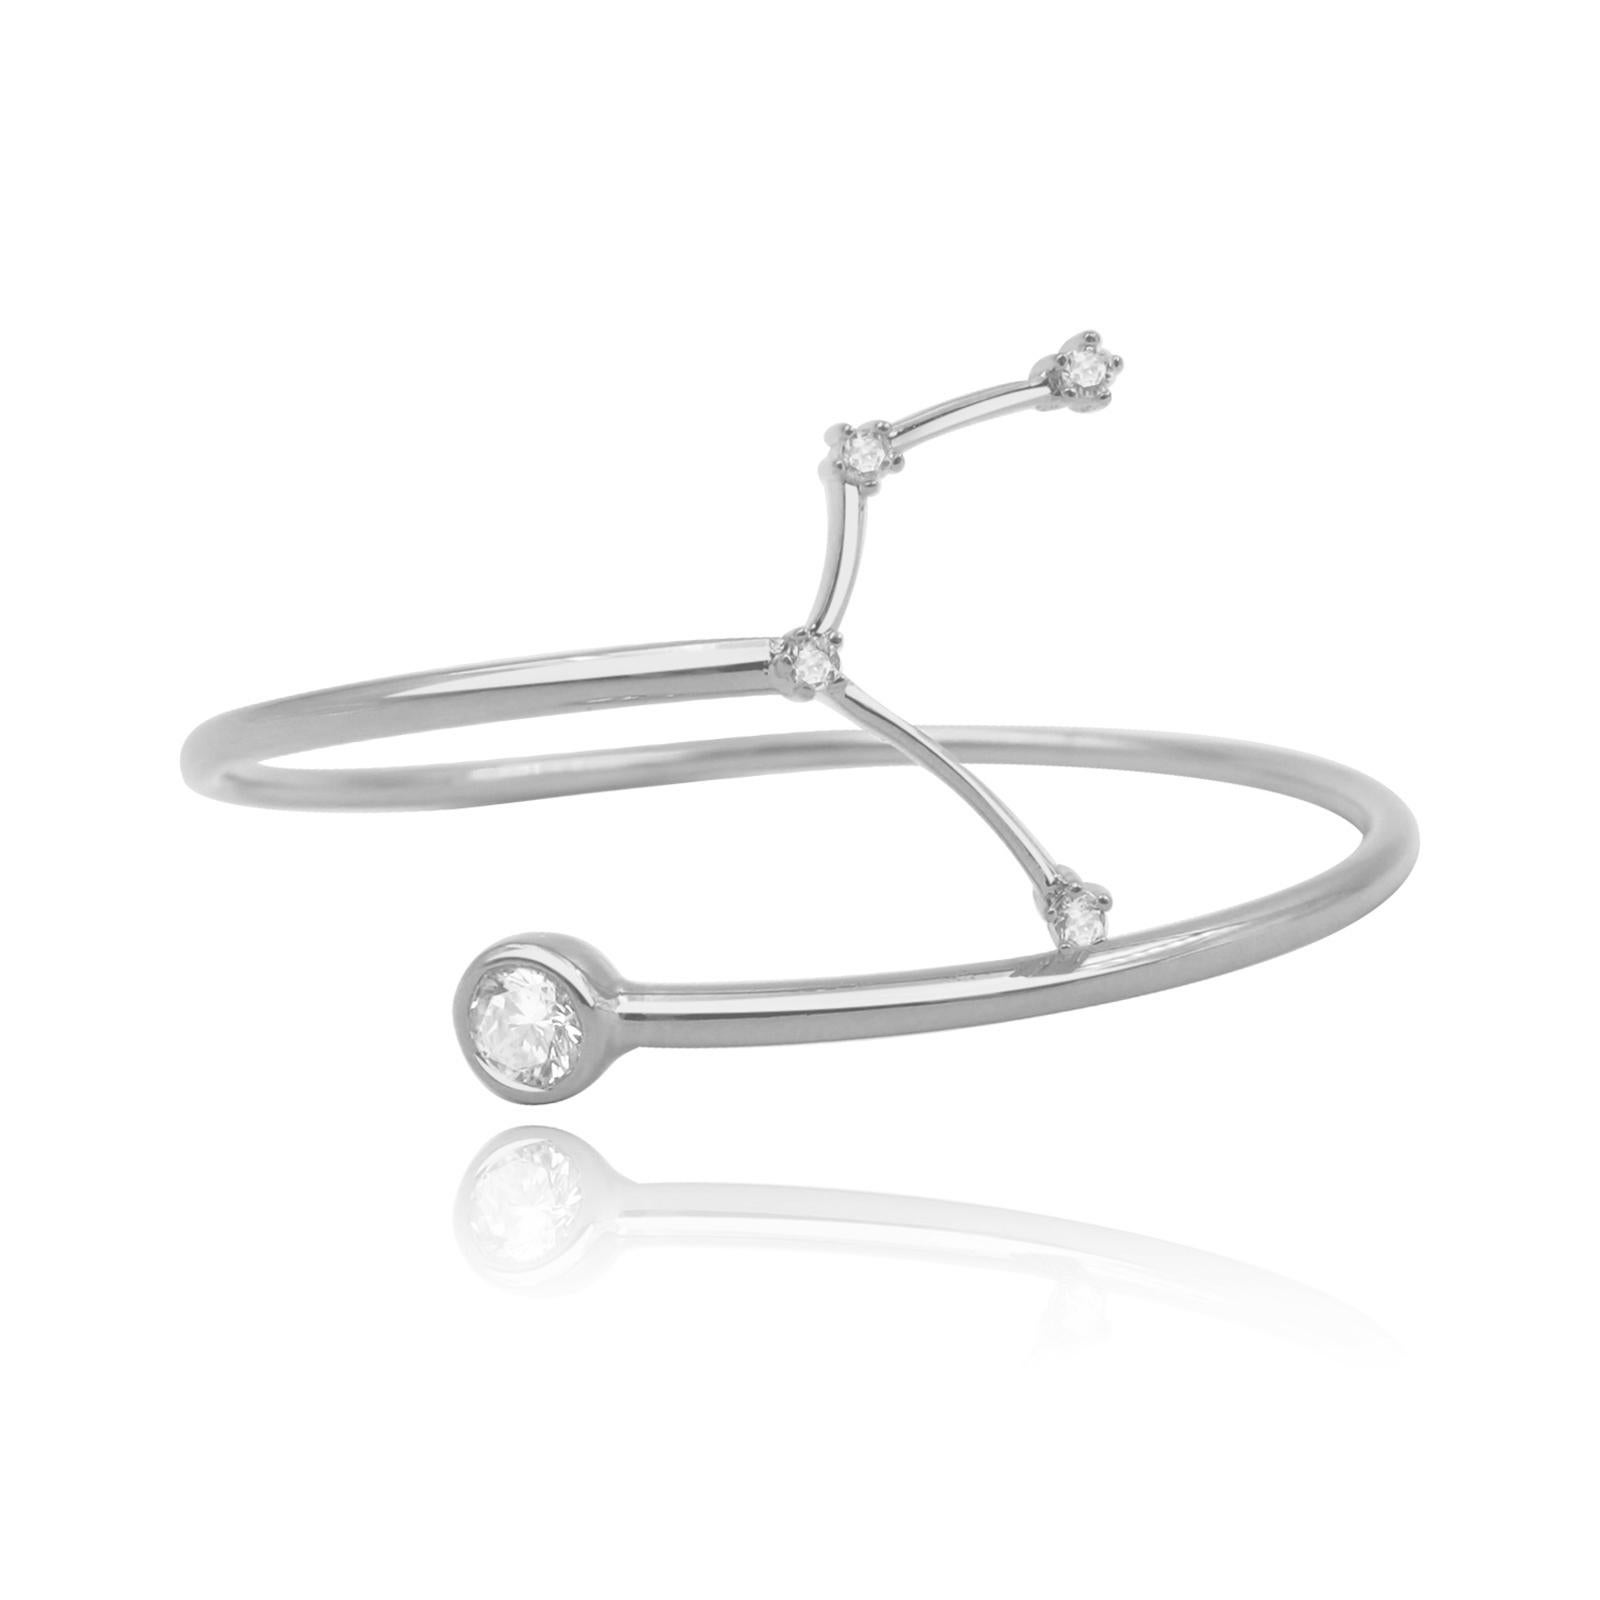 You are unique and your zodiac tells part of your story.  How your zodiac is displayed in the beautiful nighttime sky is what we want you to carry with you always. This aquarius constellation wire bezel cuff shares a part of your personality with us